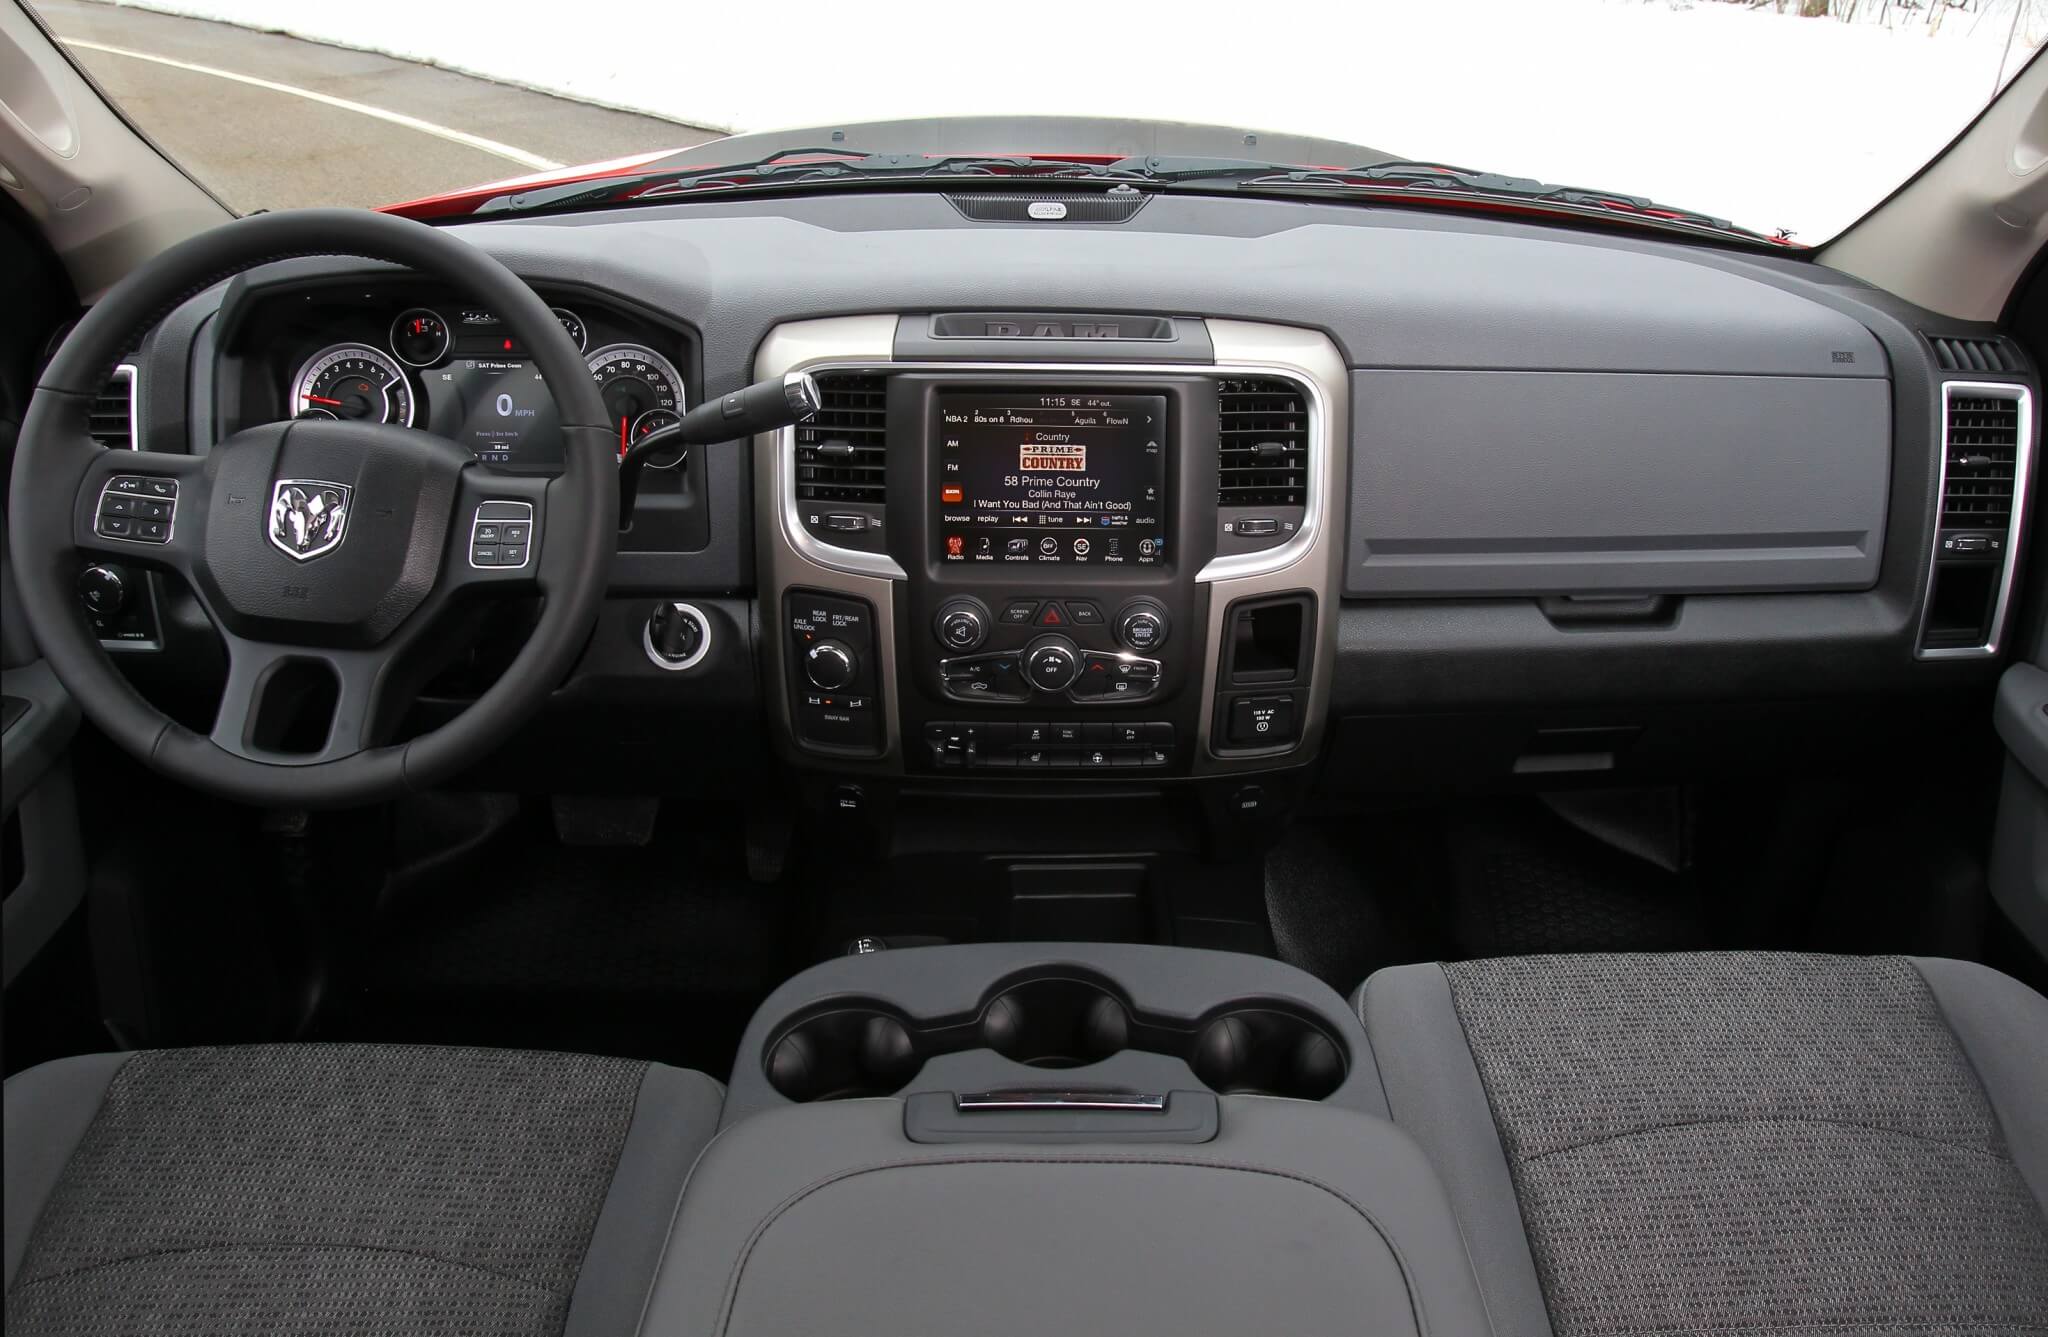 The interior of the AEV Ram is mostly stock. The dash has all the factory amenities and conveniences, so why mess with perfection?